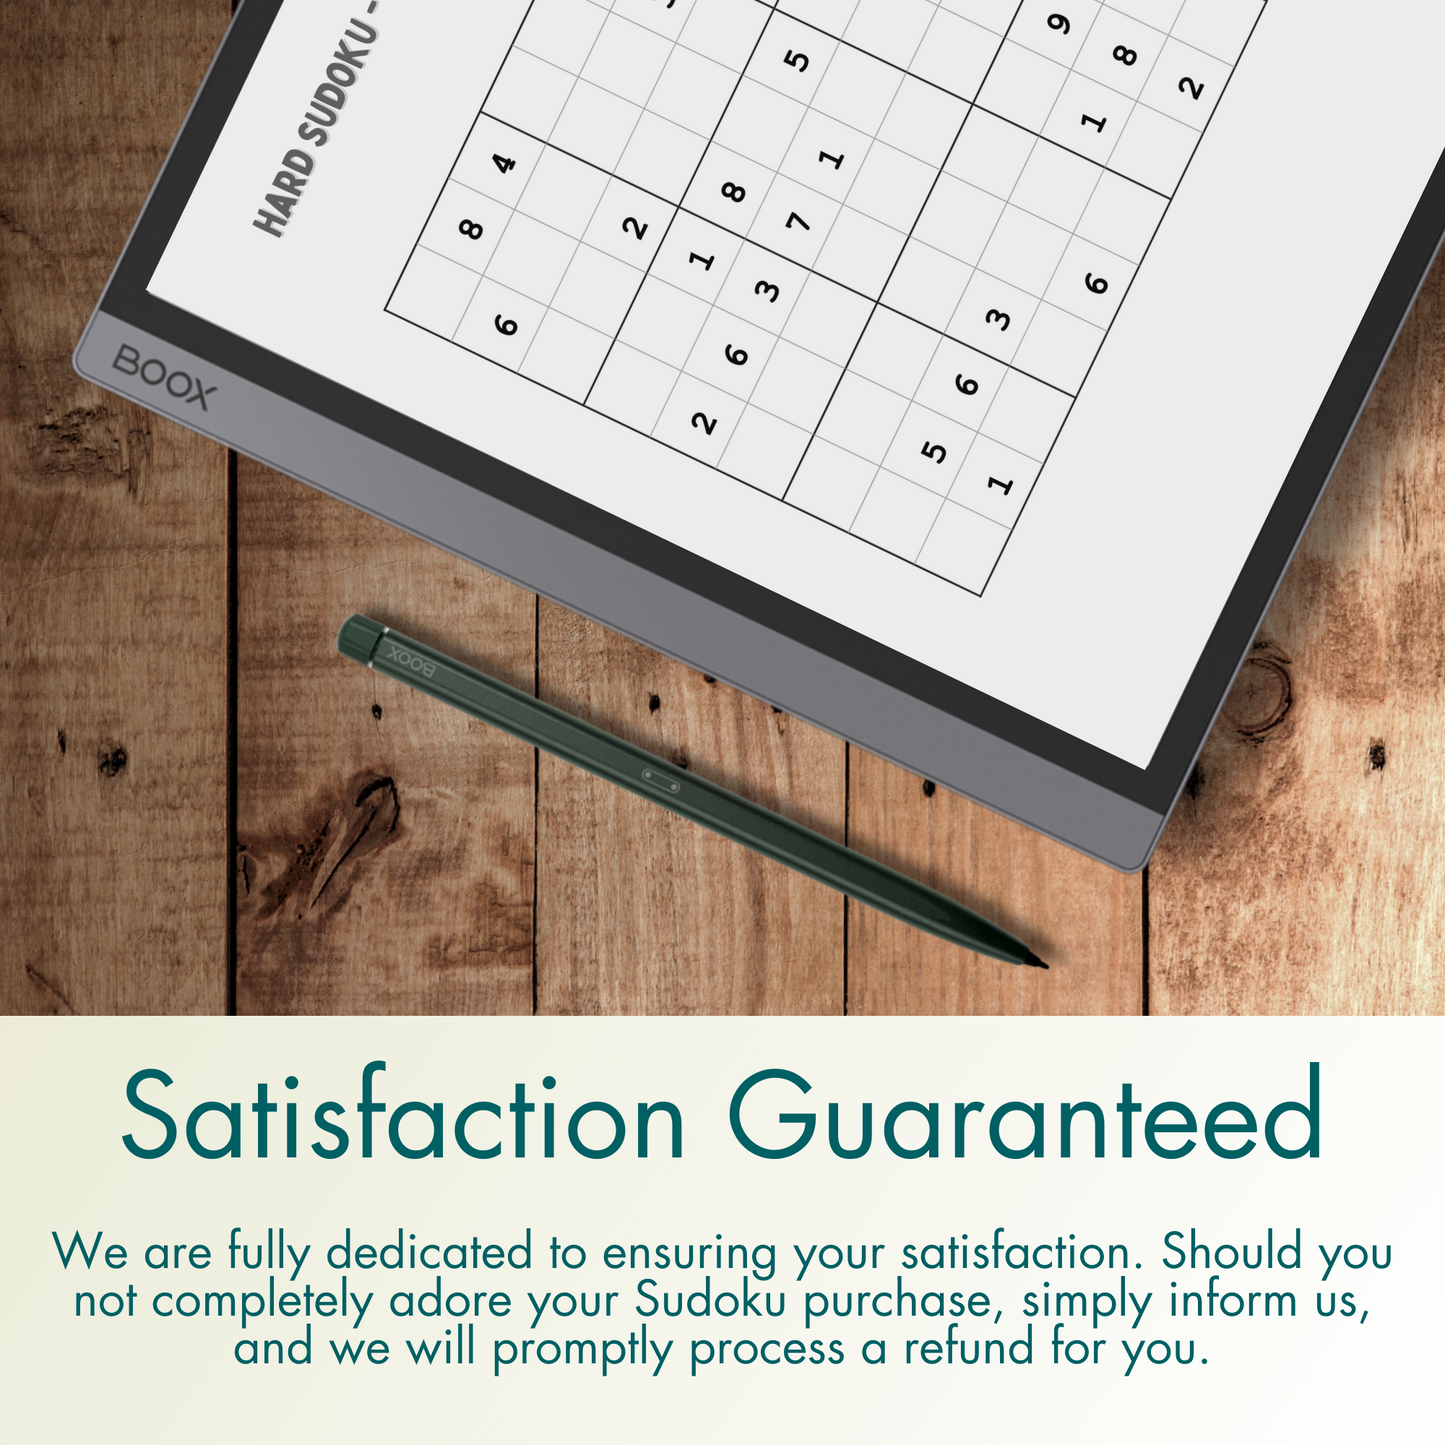 We are fully dedicated to ensuring your satisfaction. Should you not completely adore your purchase, simply inform us, and we will promptly process a refund for you.